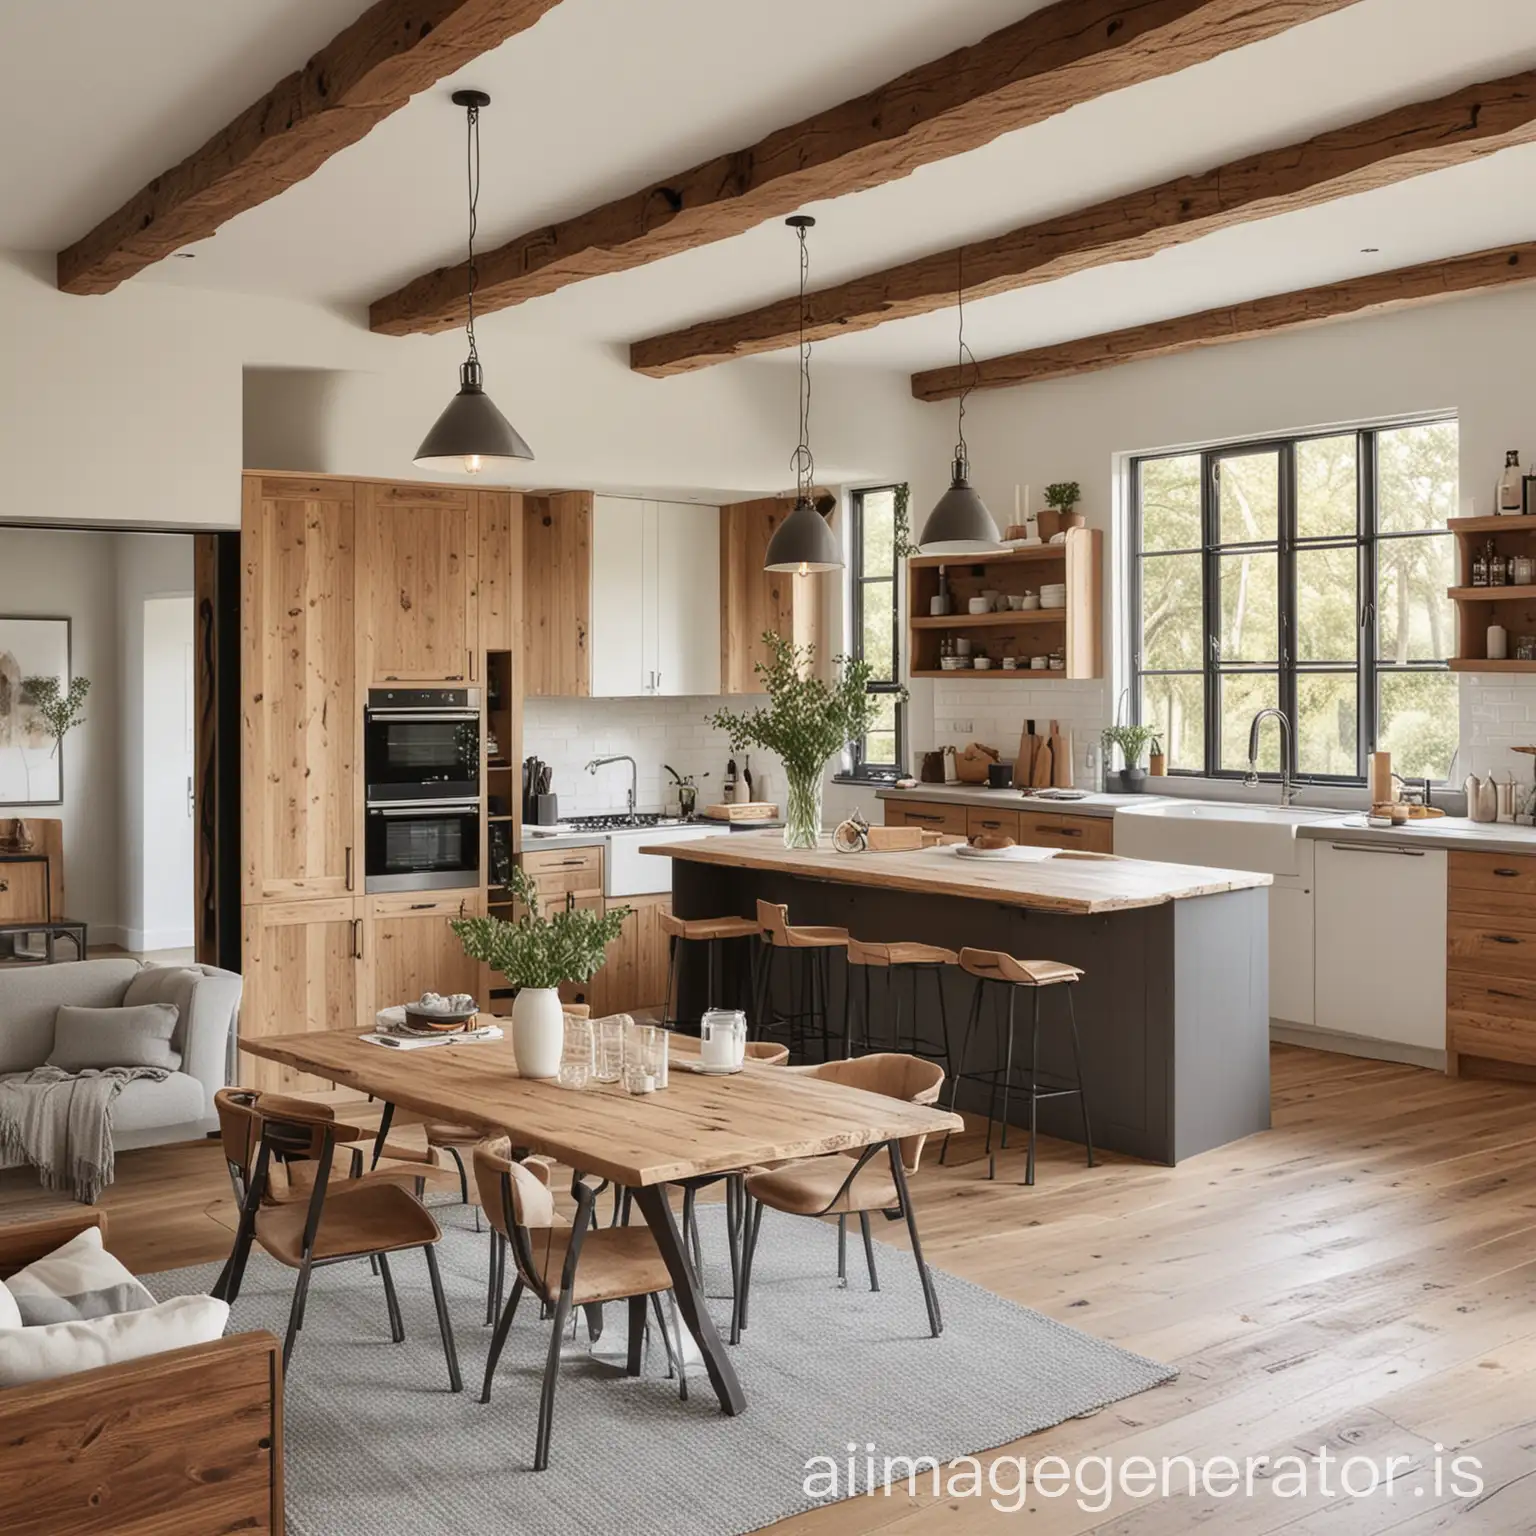 Rustic Modern Decor Ideas for Open Plan Kitchen-Living Rooms: Blending Comfort and Style